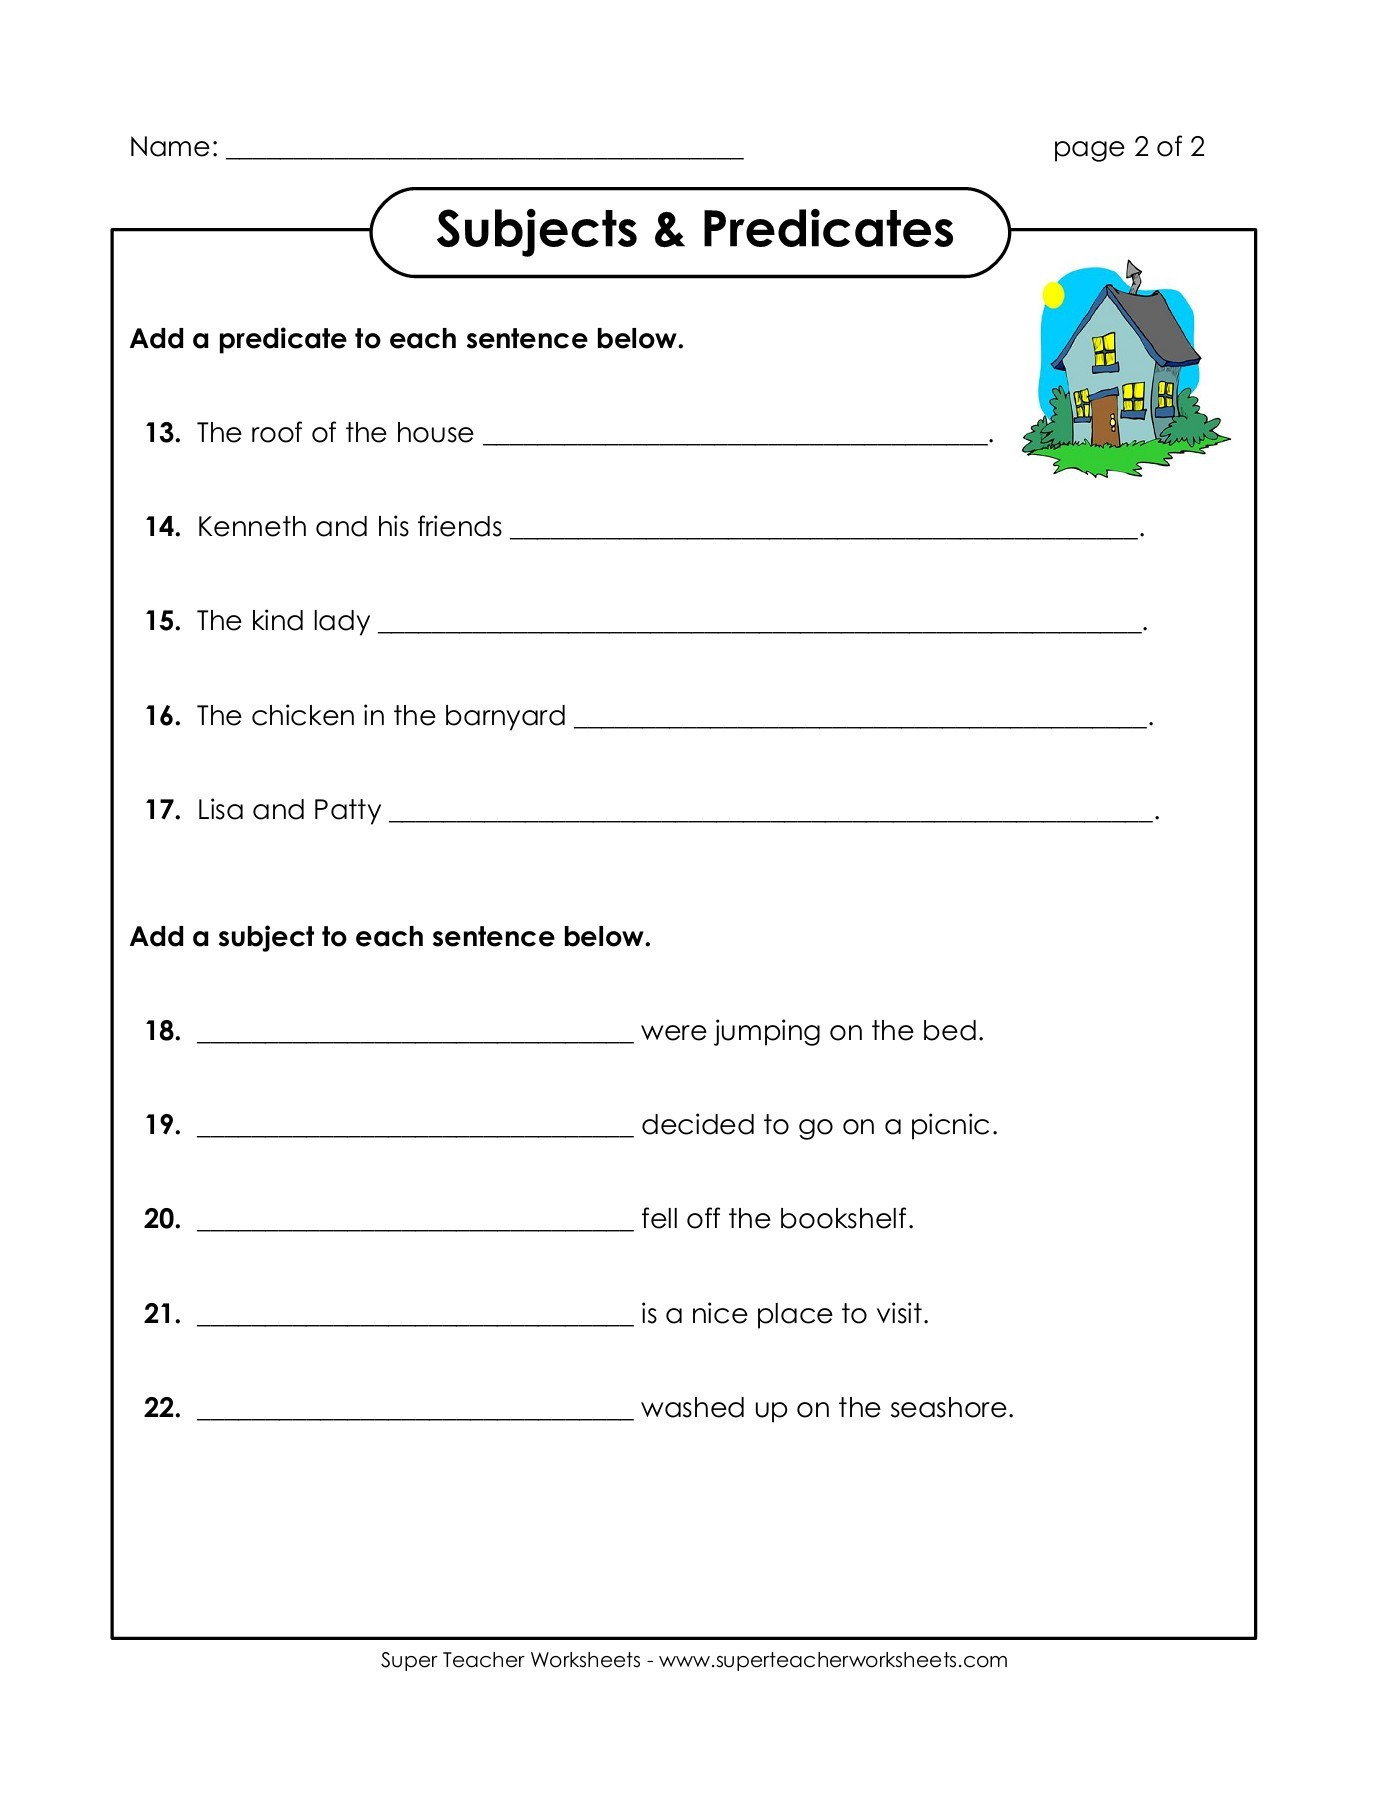 Subject and Predicate Worksheet Subjects &amp; Predicates Super Teacher Worksheets Pages 1 3